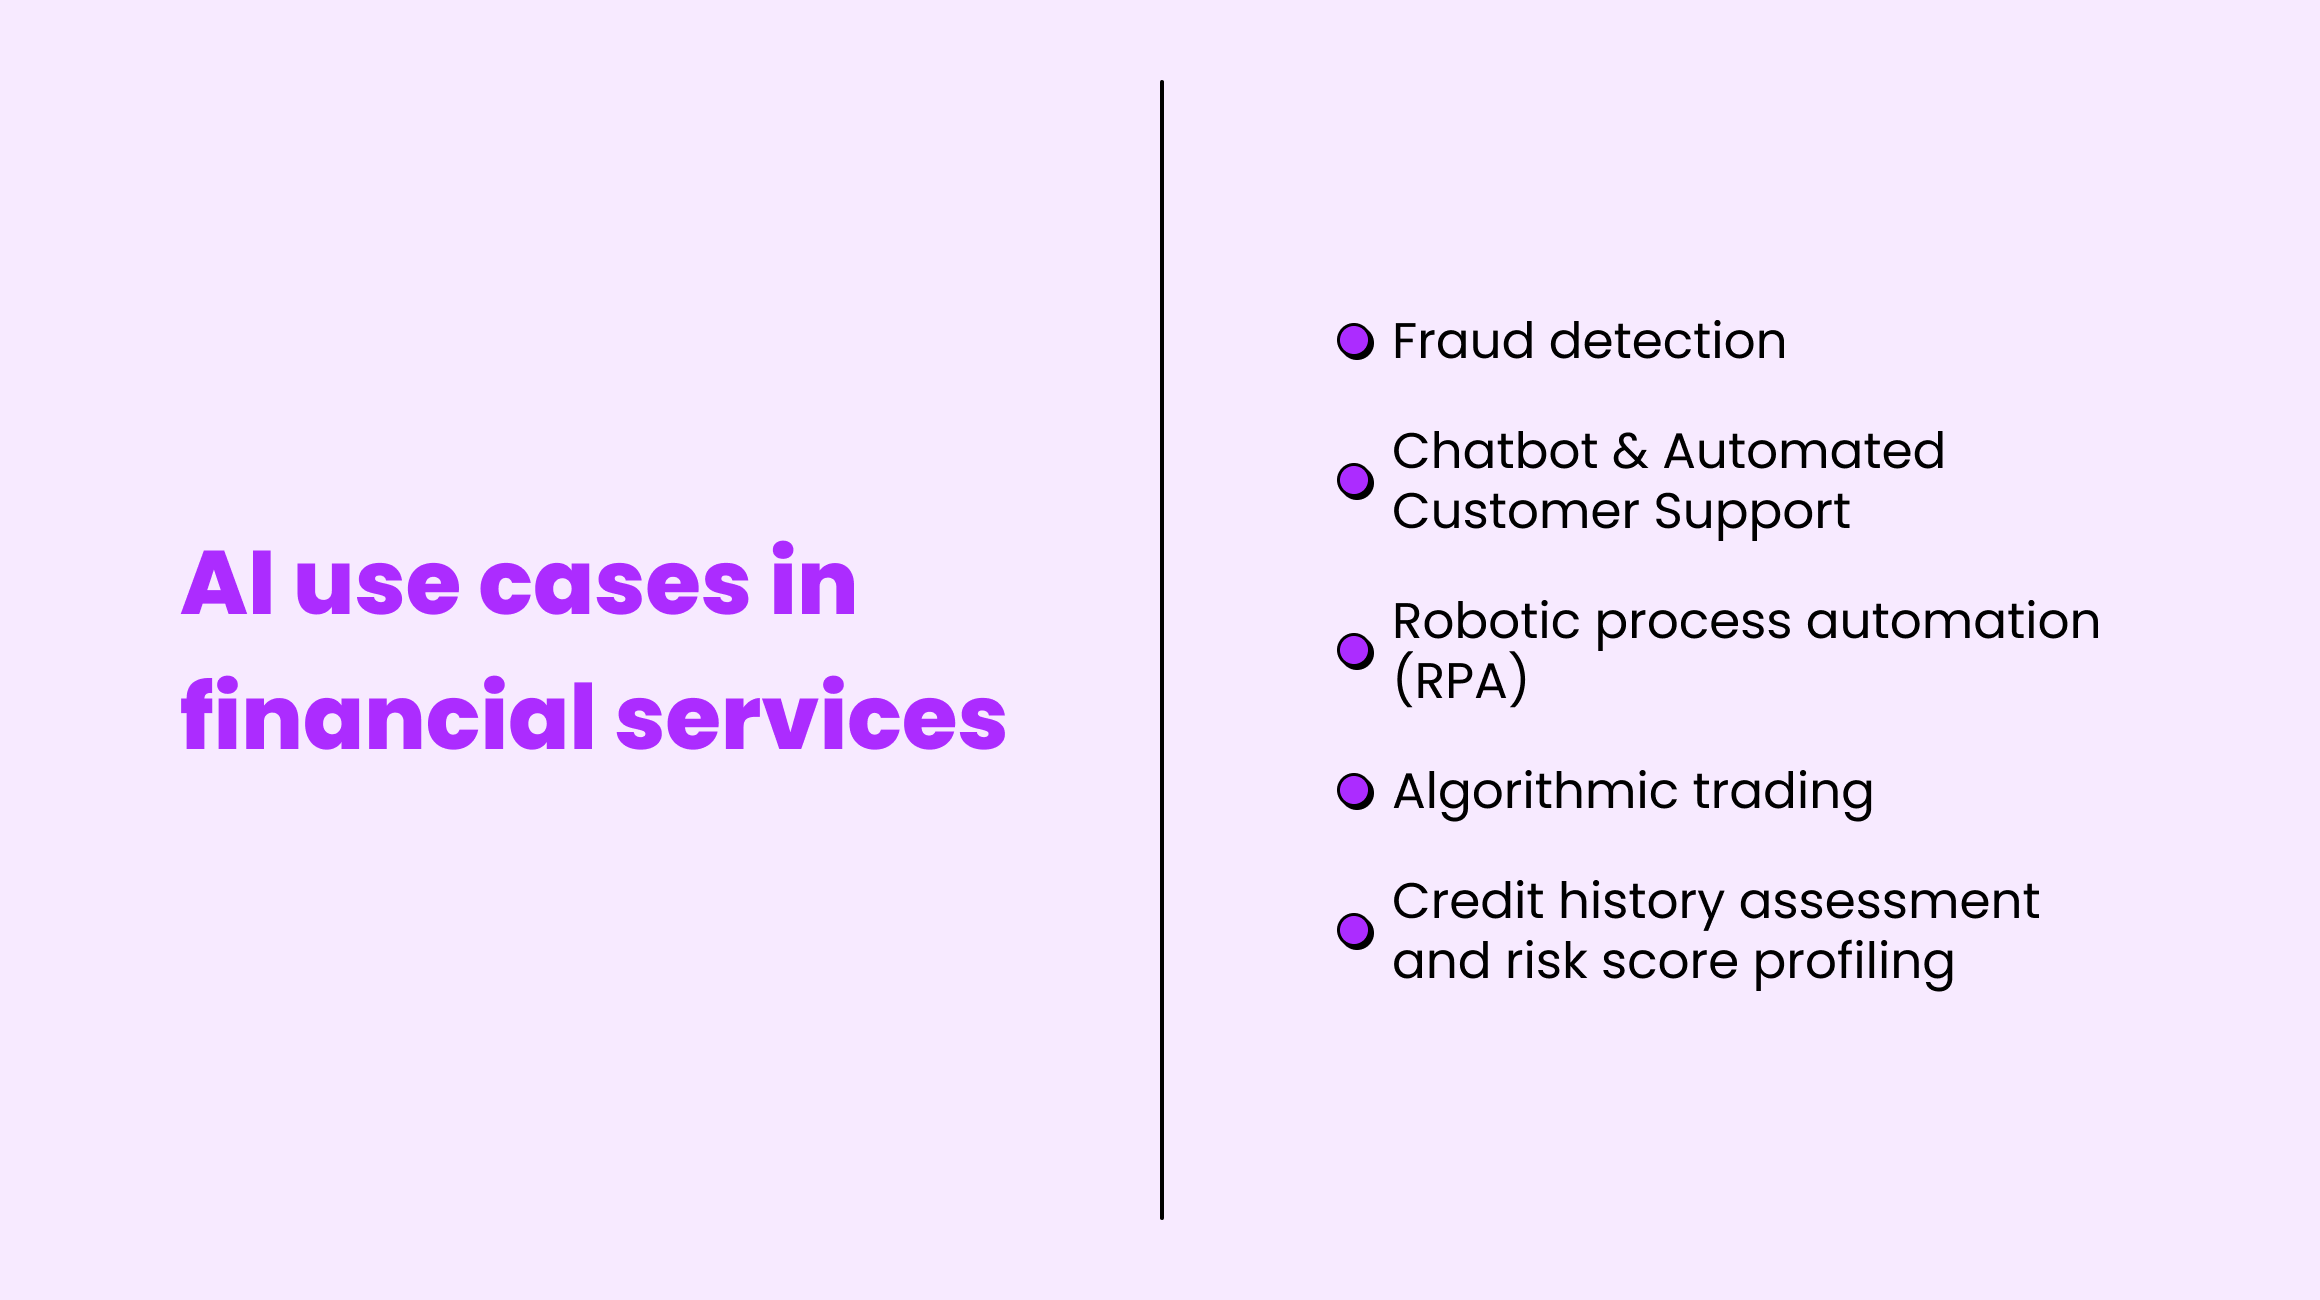 Use cases of AI in fintech